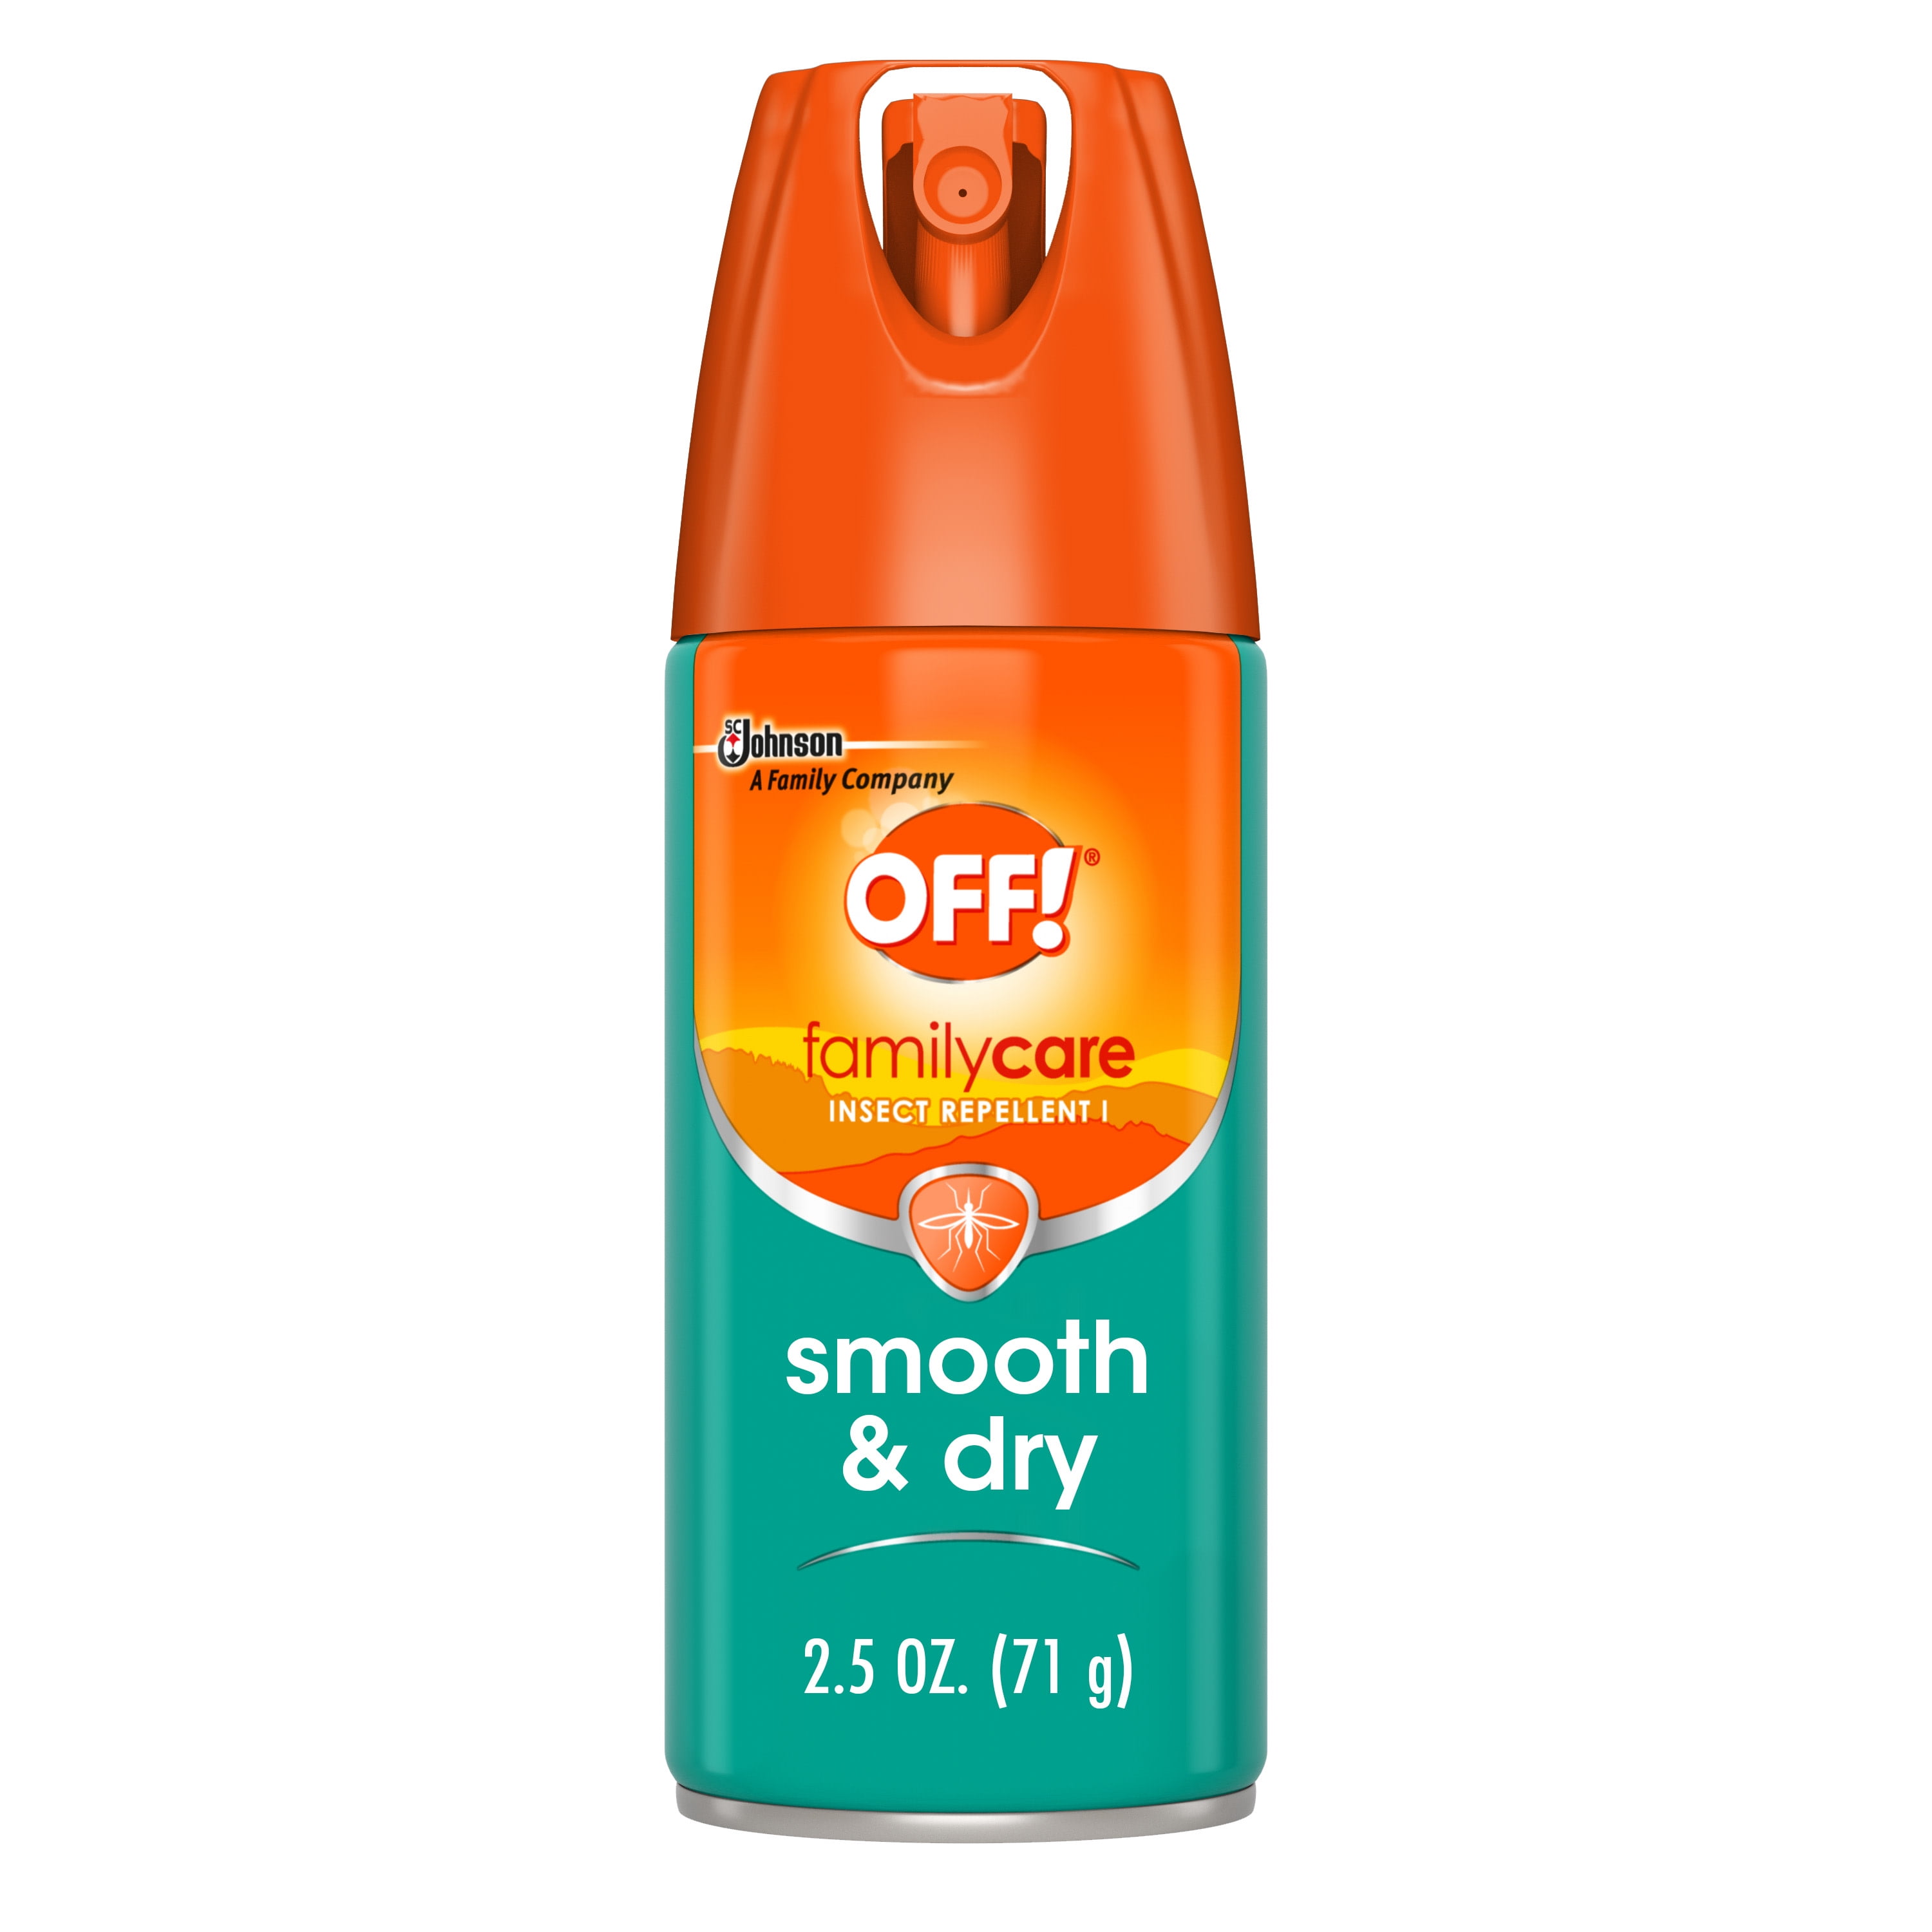 OFF! FamilyCare Insect Repellent I, Smooth & Dry, 2.5 Oz, 1Ct